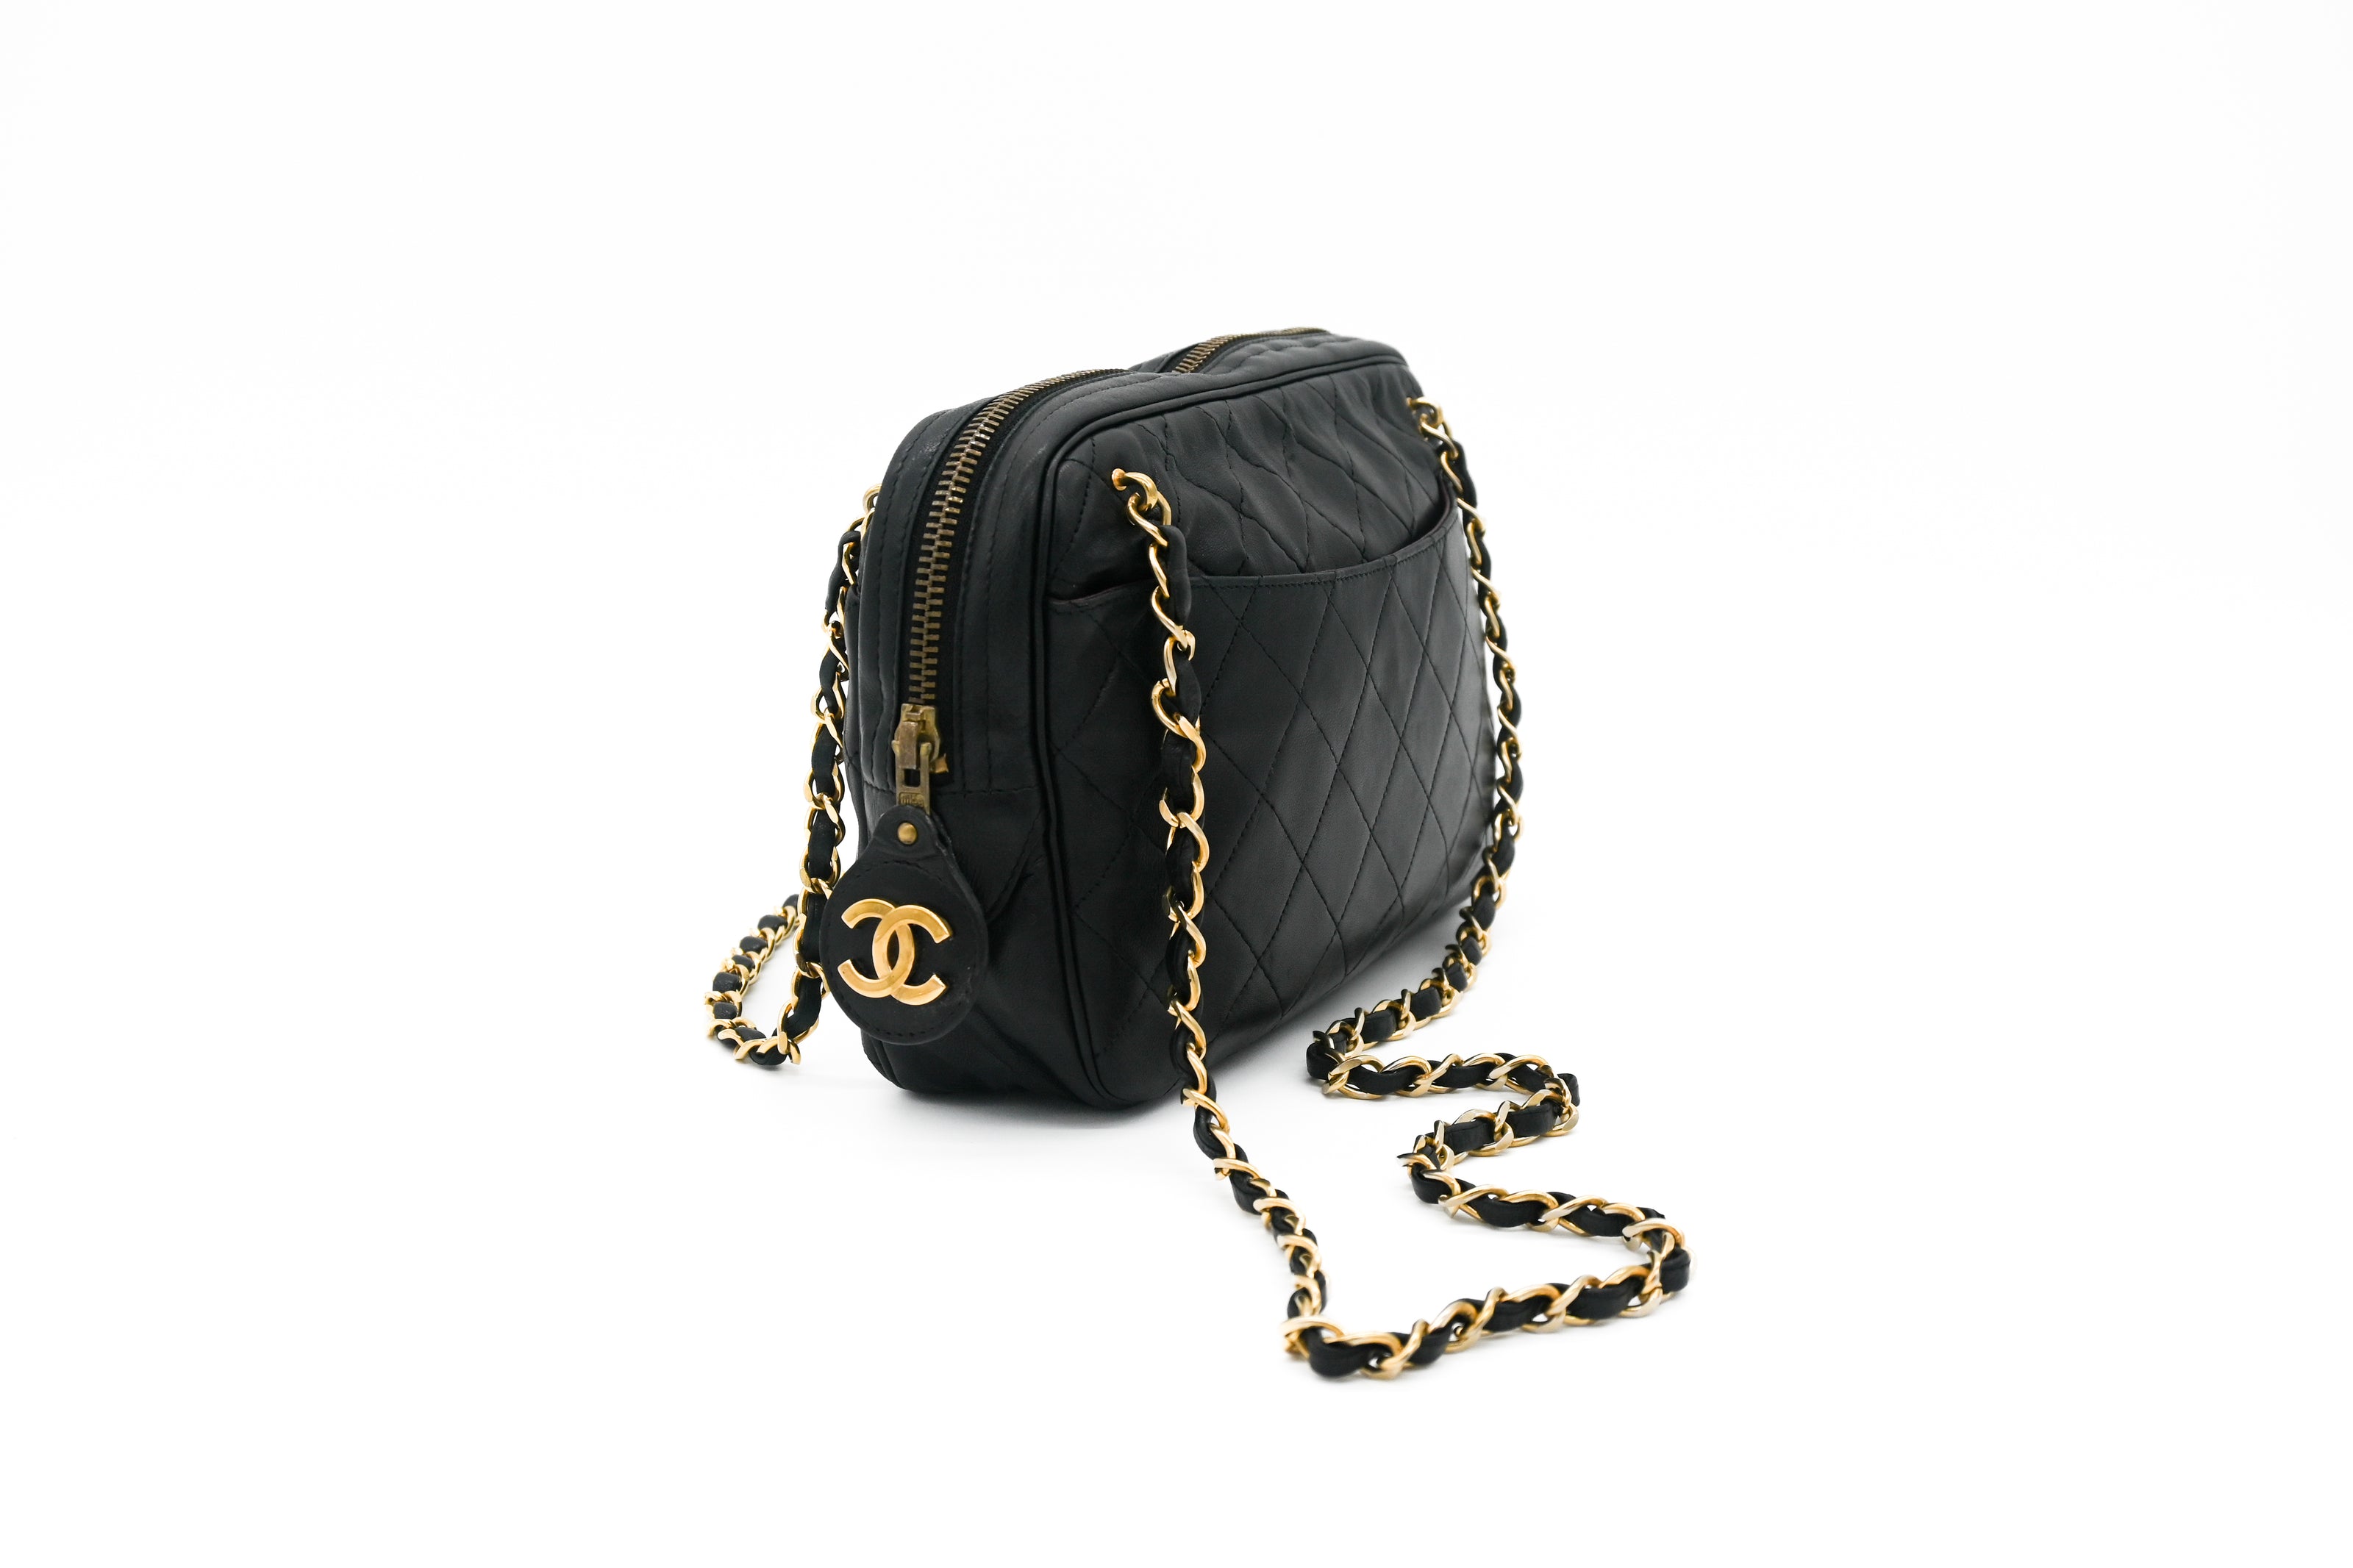 Chanel Cc Front Pocket Double Zip Camera Bag Quilted Lambskin